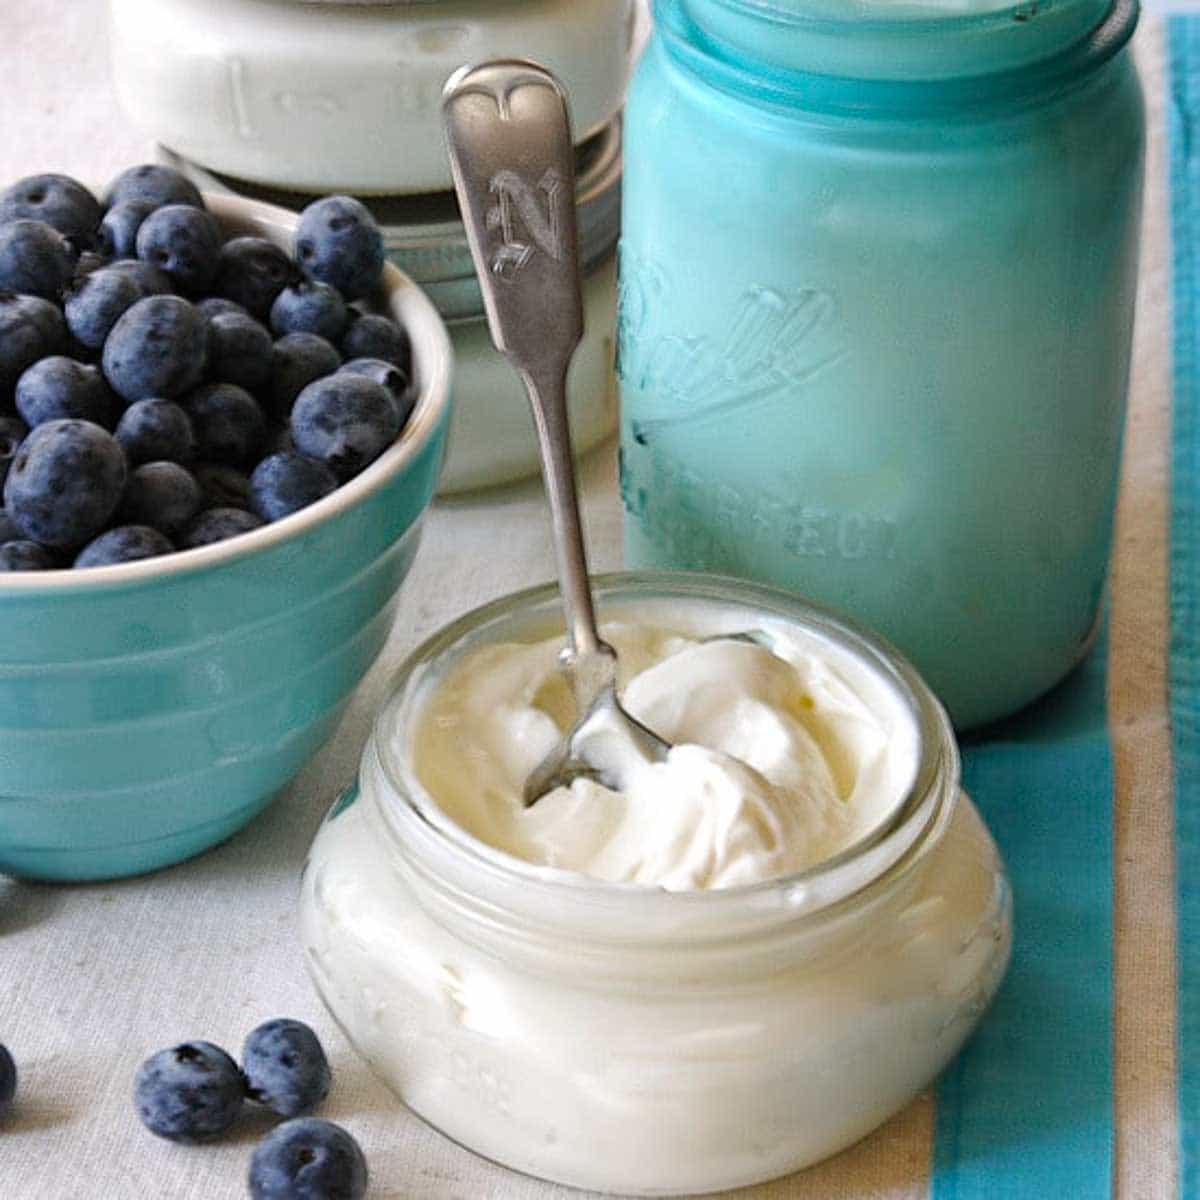 How To Make Greek Yogurt You Will Dream About (+ Video)